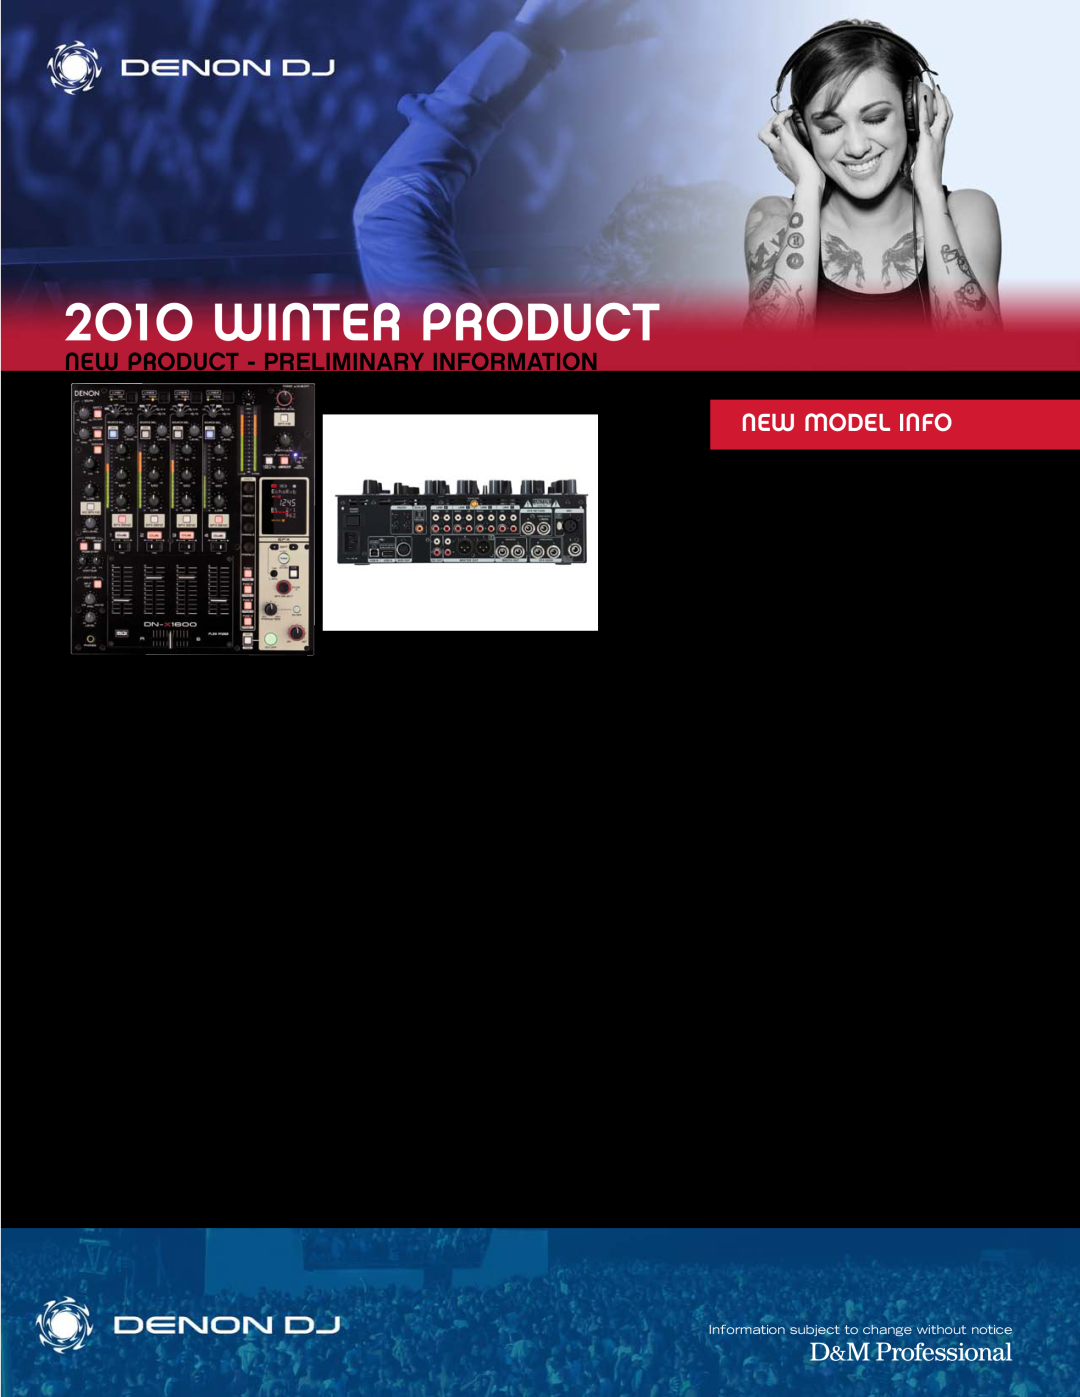 Denon DJ DN-X1600 specifications Winter Product, Media Player & Controller, New Product - Preliminary Information 